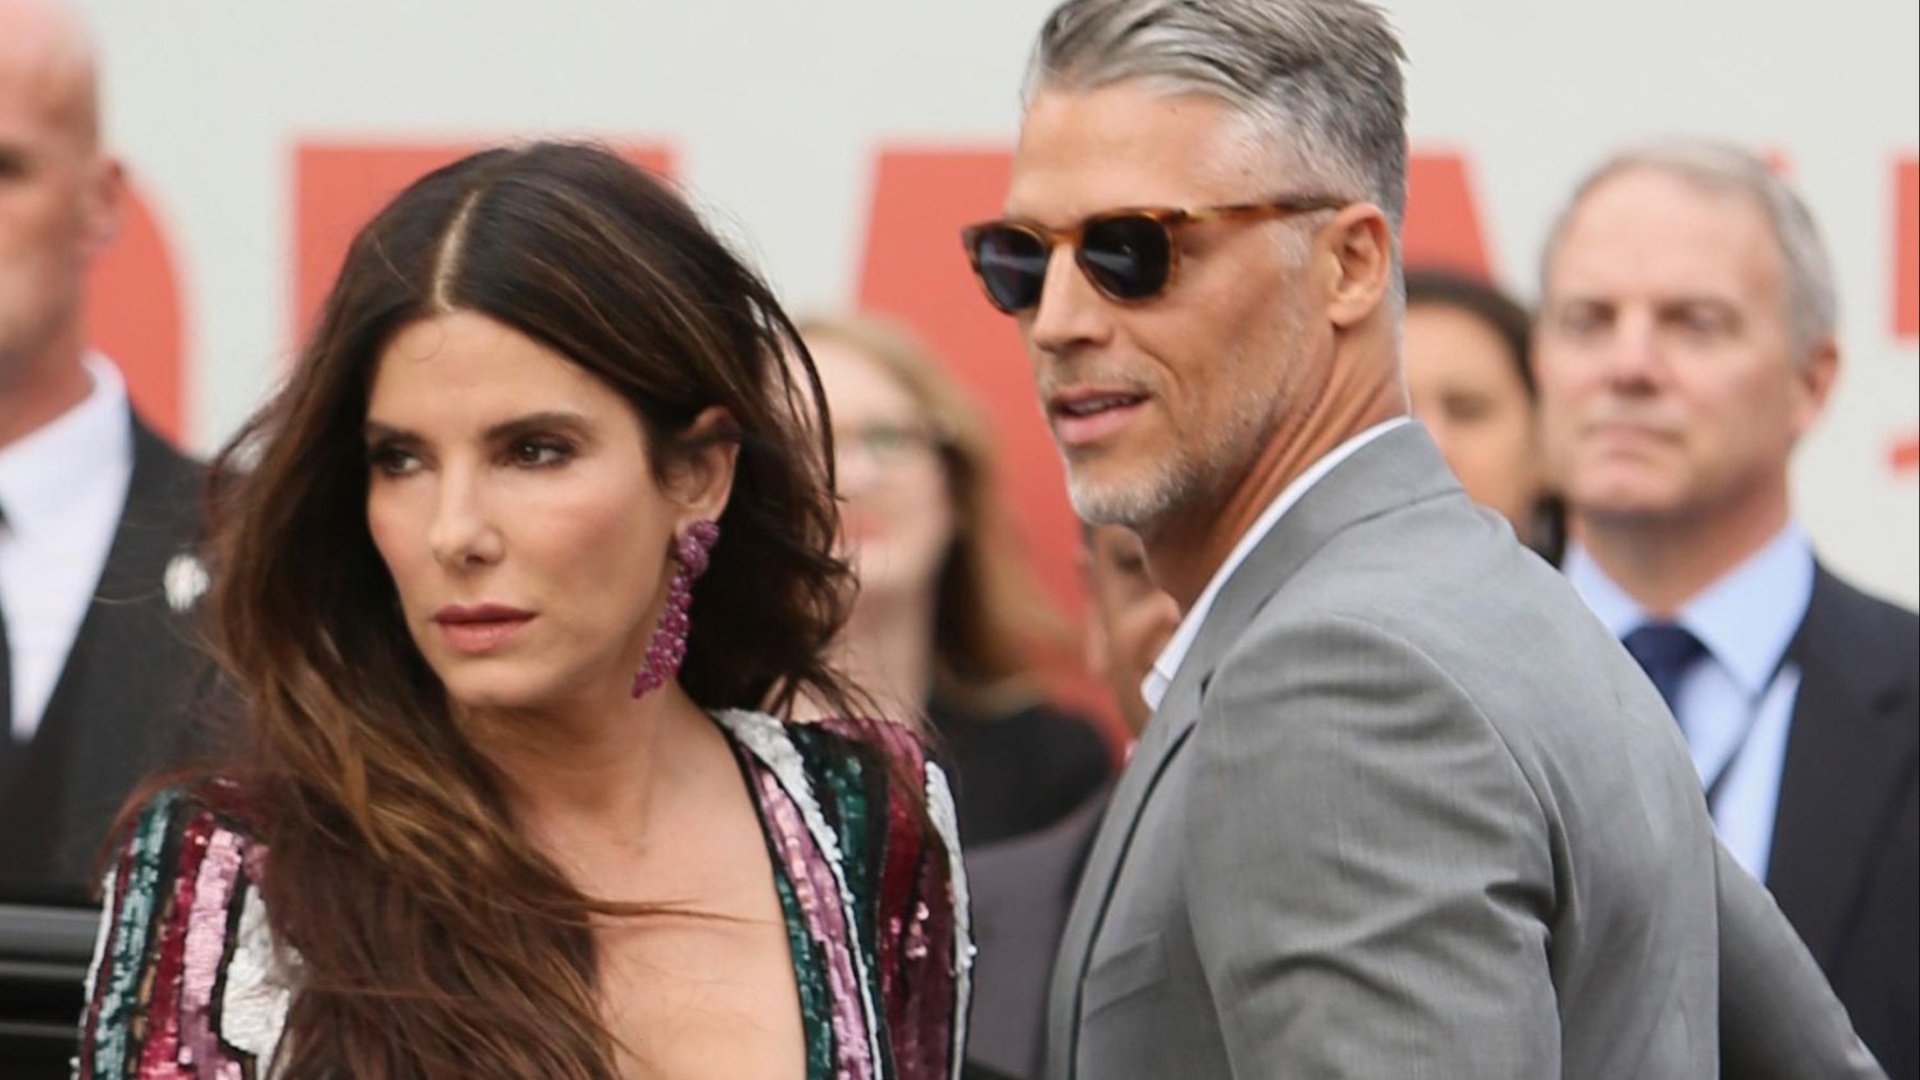 Bryan Randall: Sandra Bullock's Partner Passes Away at 57 After Battle with ALS